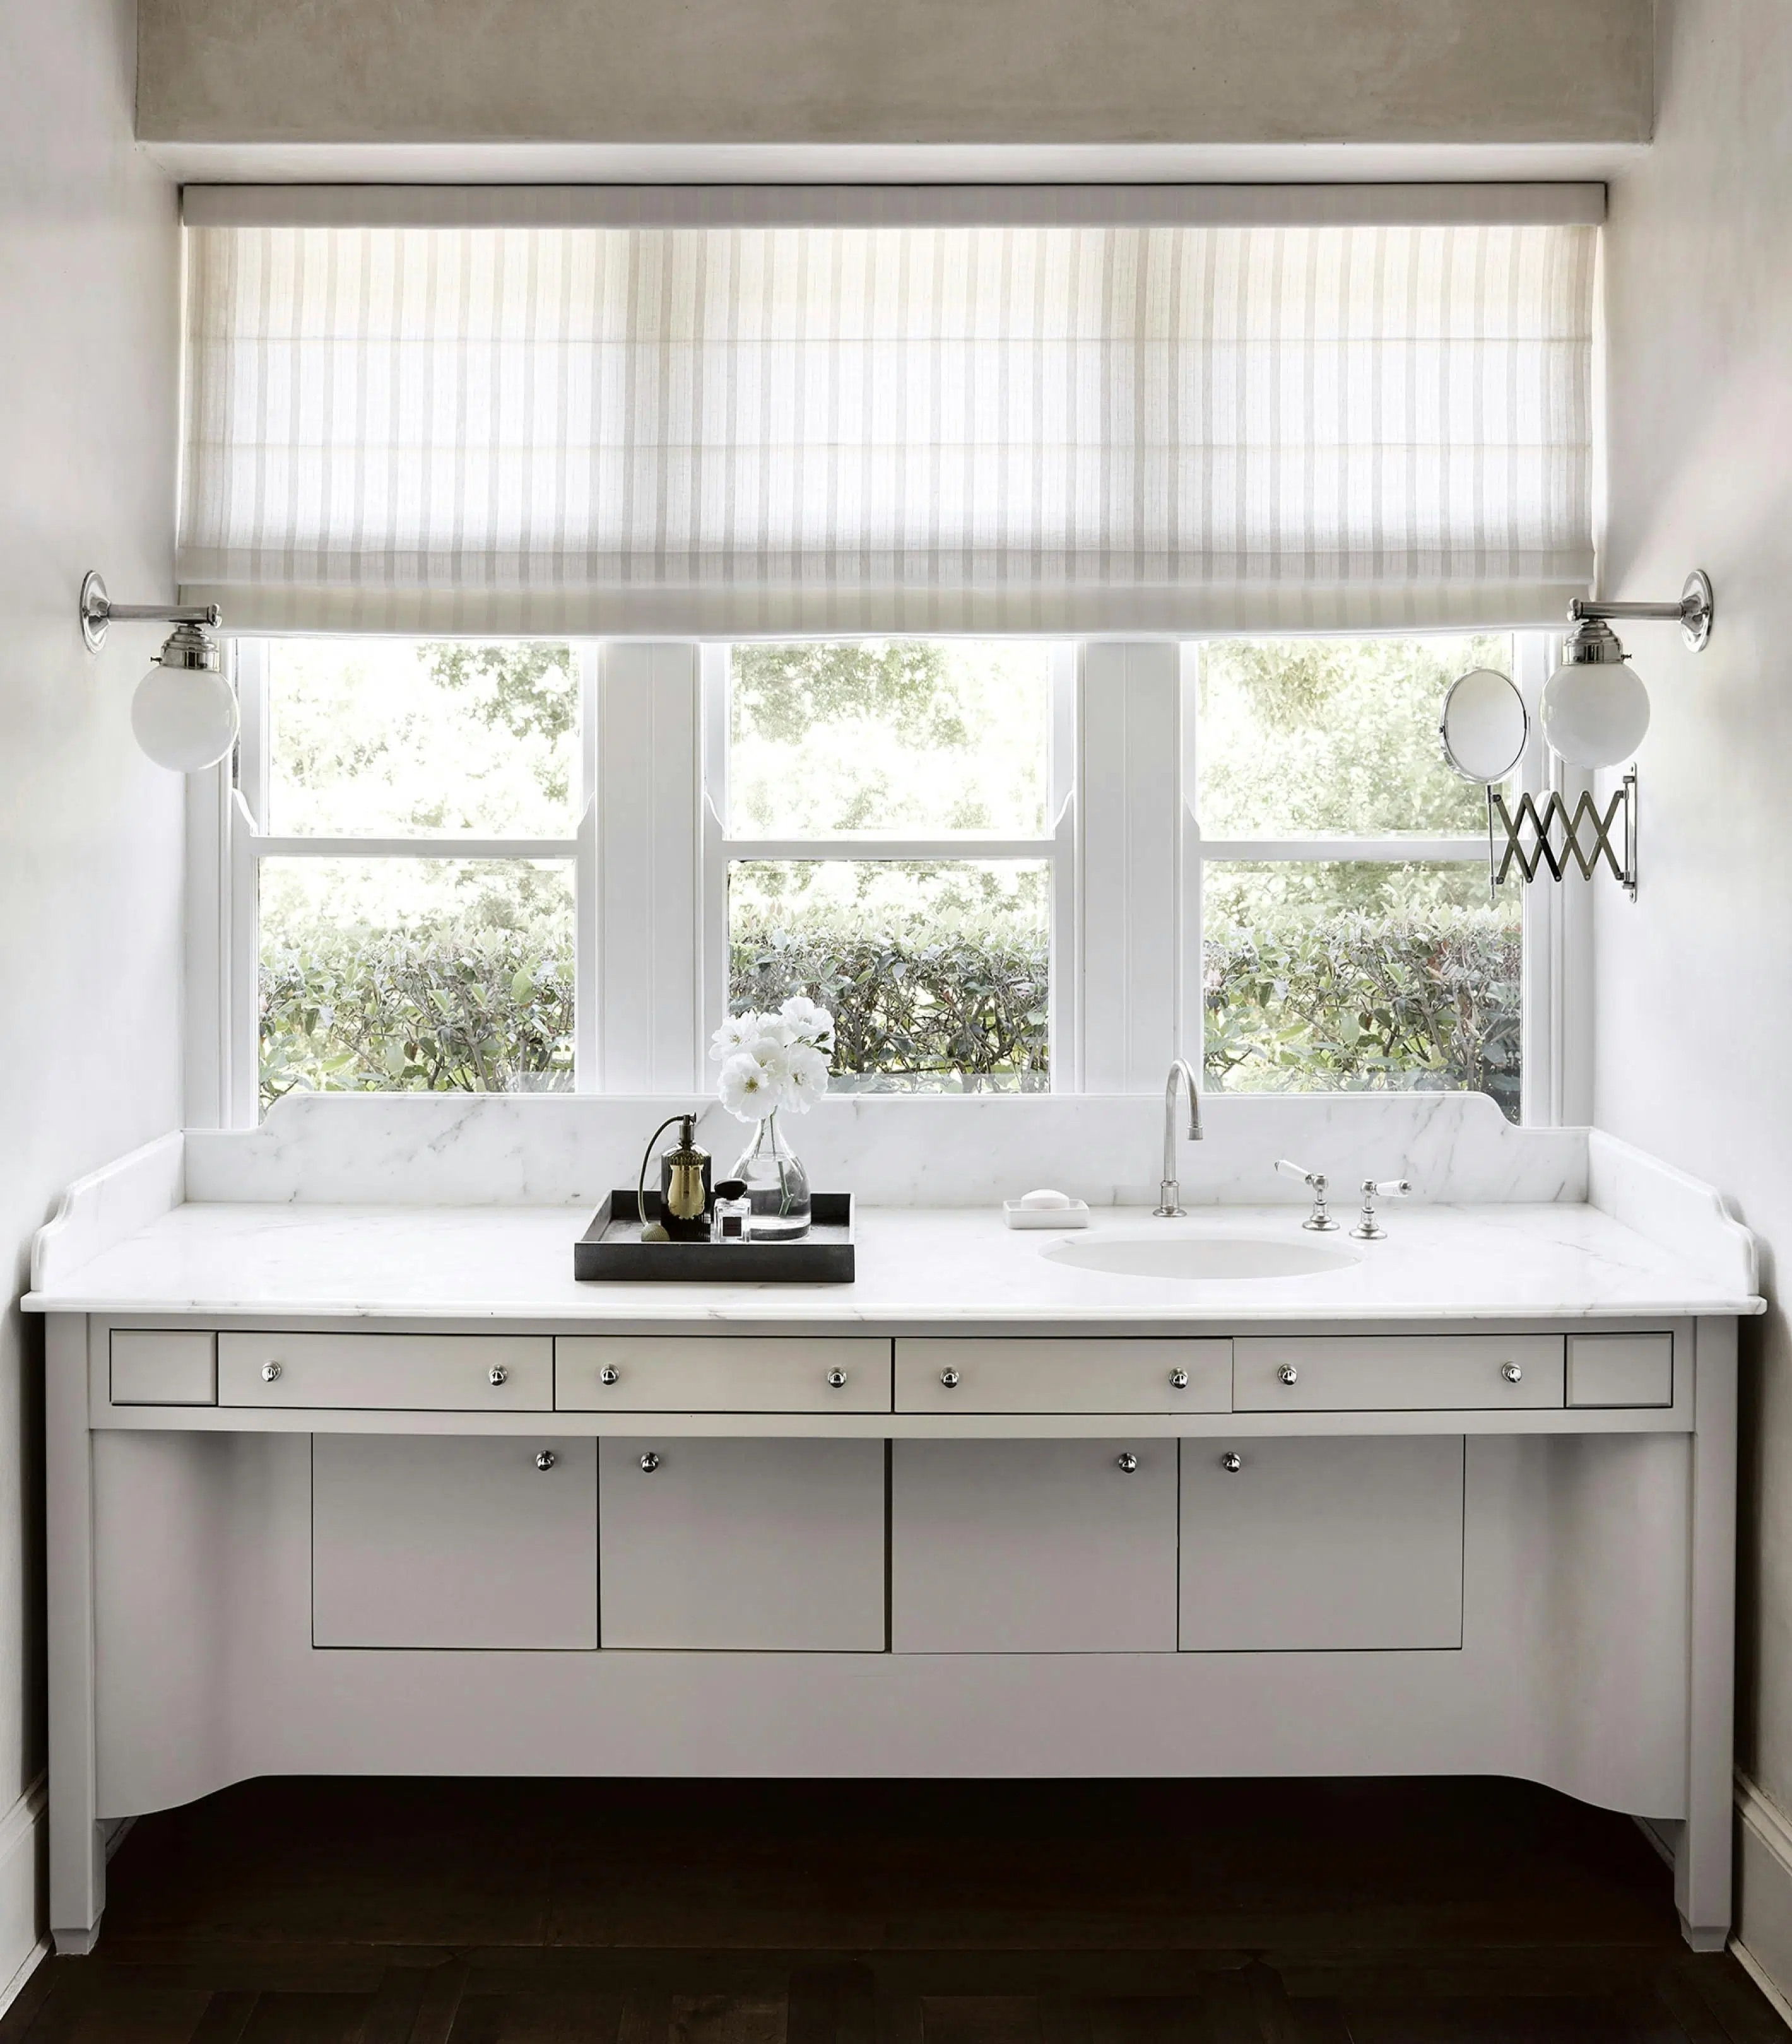 A white bathroom interior looks out through windows onto a garden hedge. A wide vanity's countertop features a sink to the viewer's right, with a tray holding flowers and scent containers to the left.